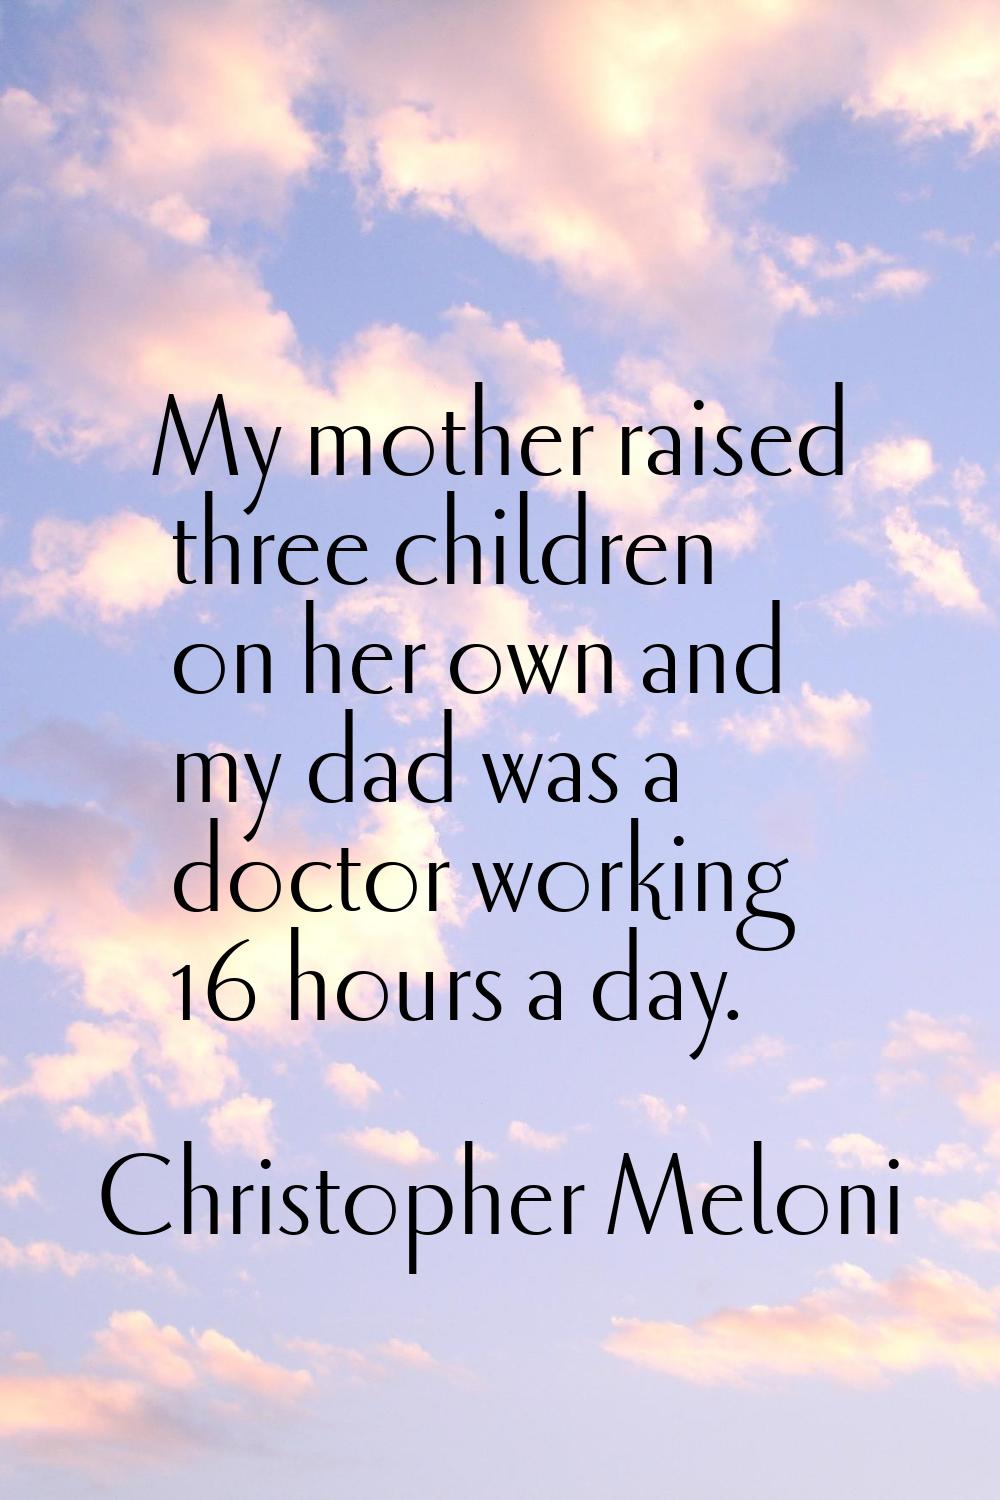 My mother raised three children on her own and my dad was a doctor working 16 hours a day.